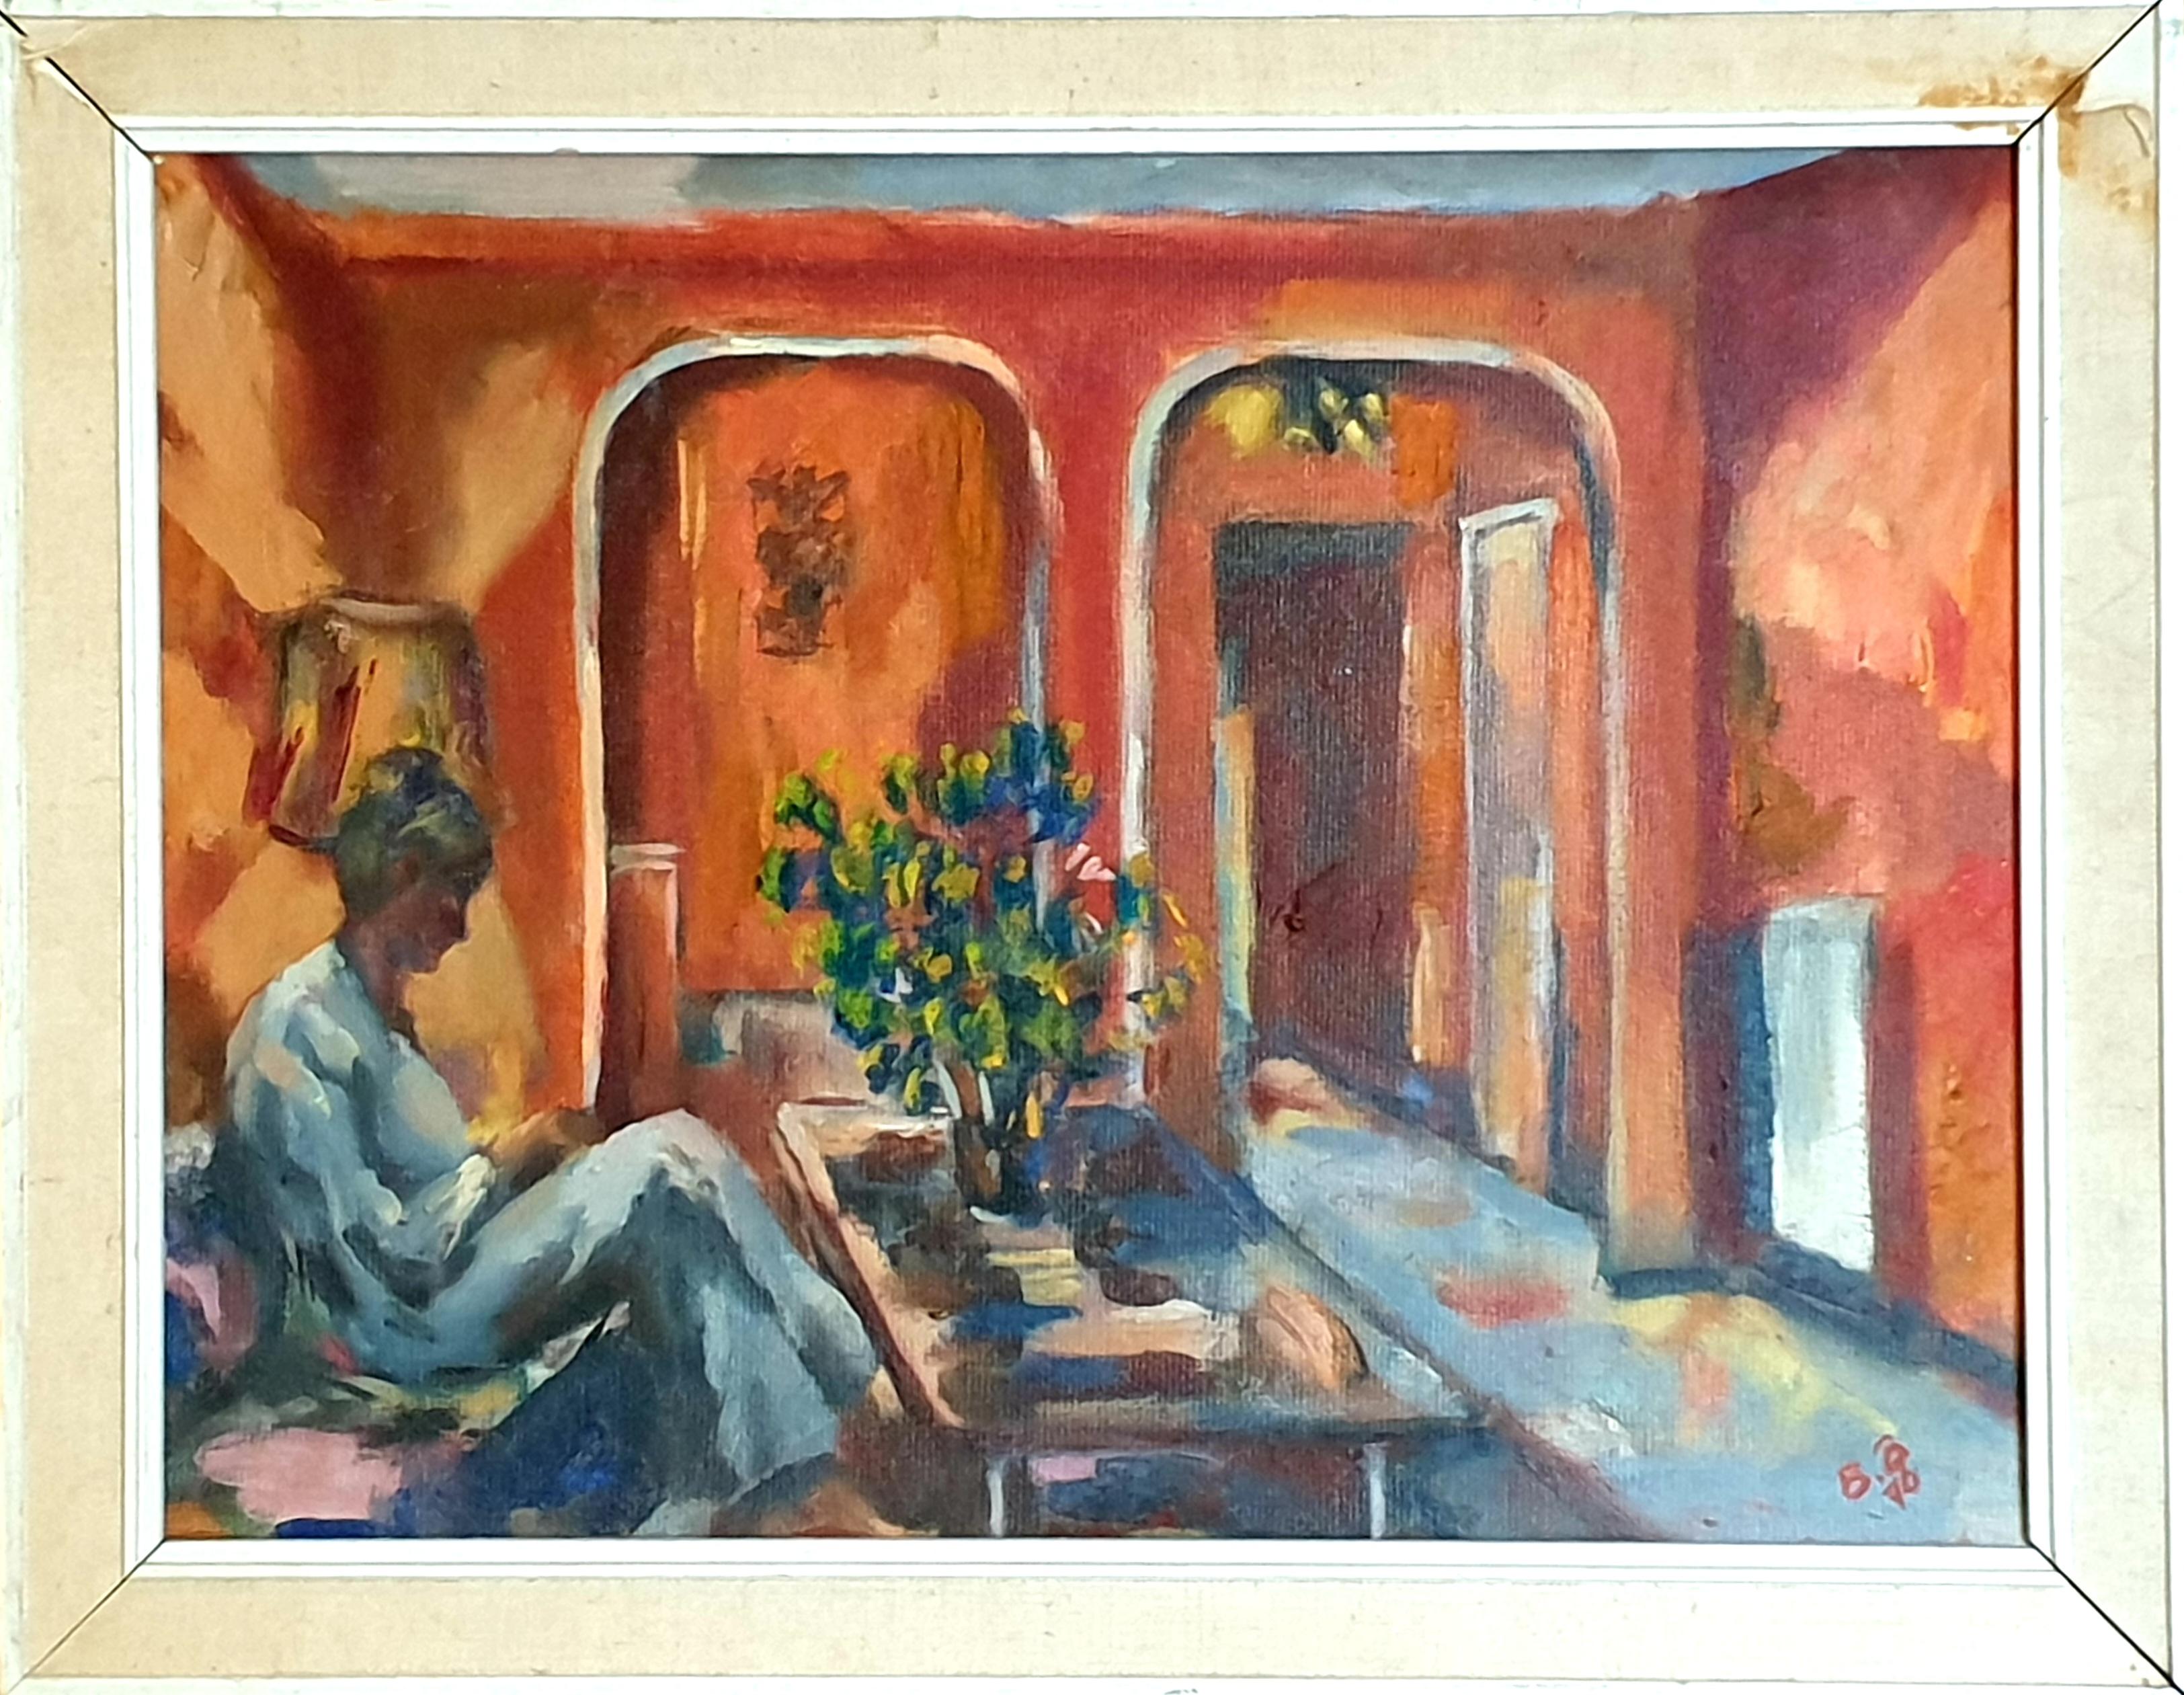  Late Mid Century Interior Scene, A Villa at Cannes, South of France - Painting by Bill Brown